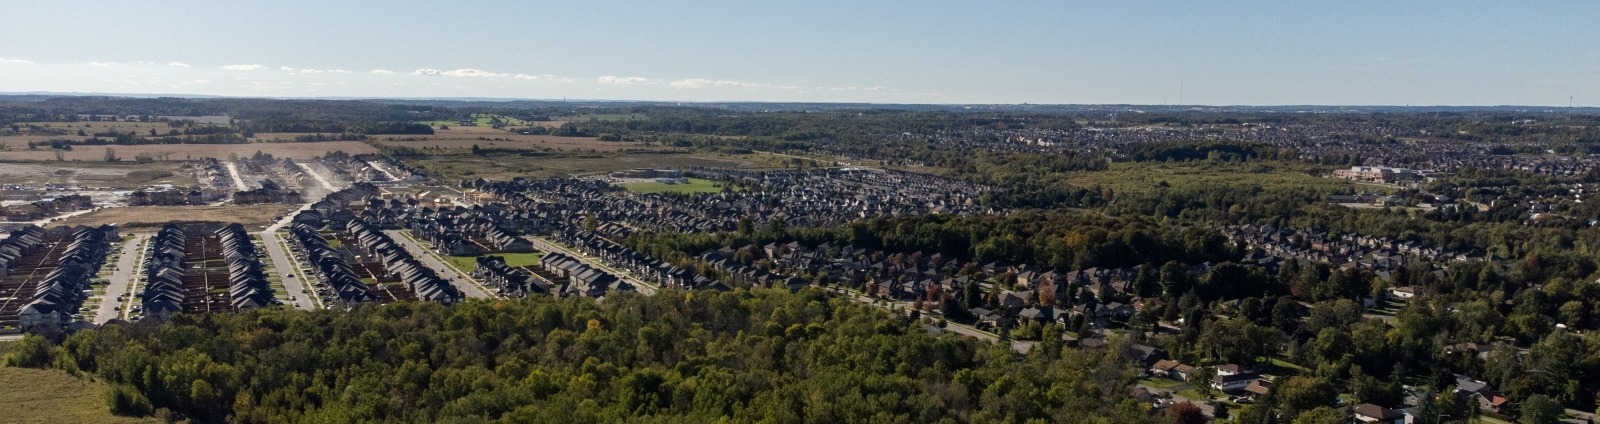 Drone photo of neighbourhoods and urban forest